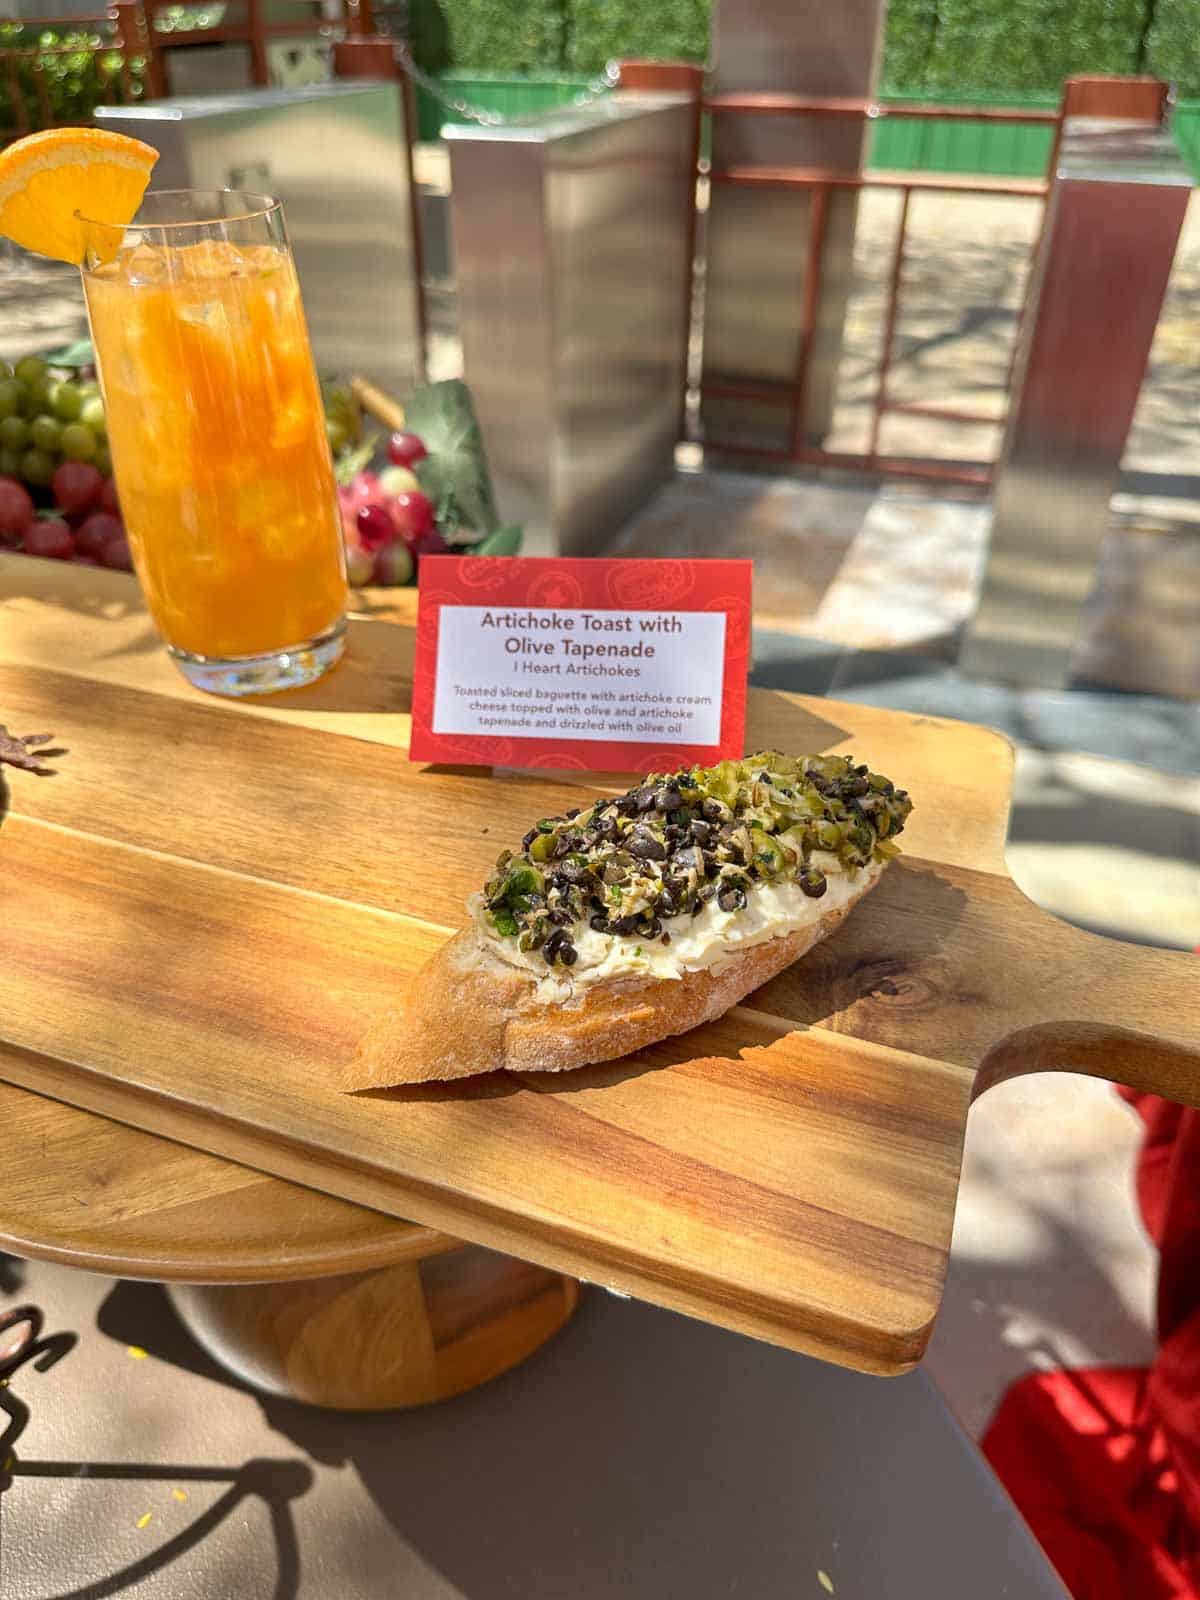 A slice of bread with artichoke and olive chopped up on top sitting on a wooden cutting board outside.